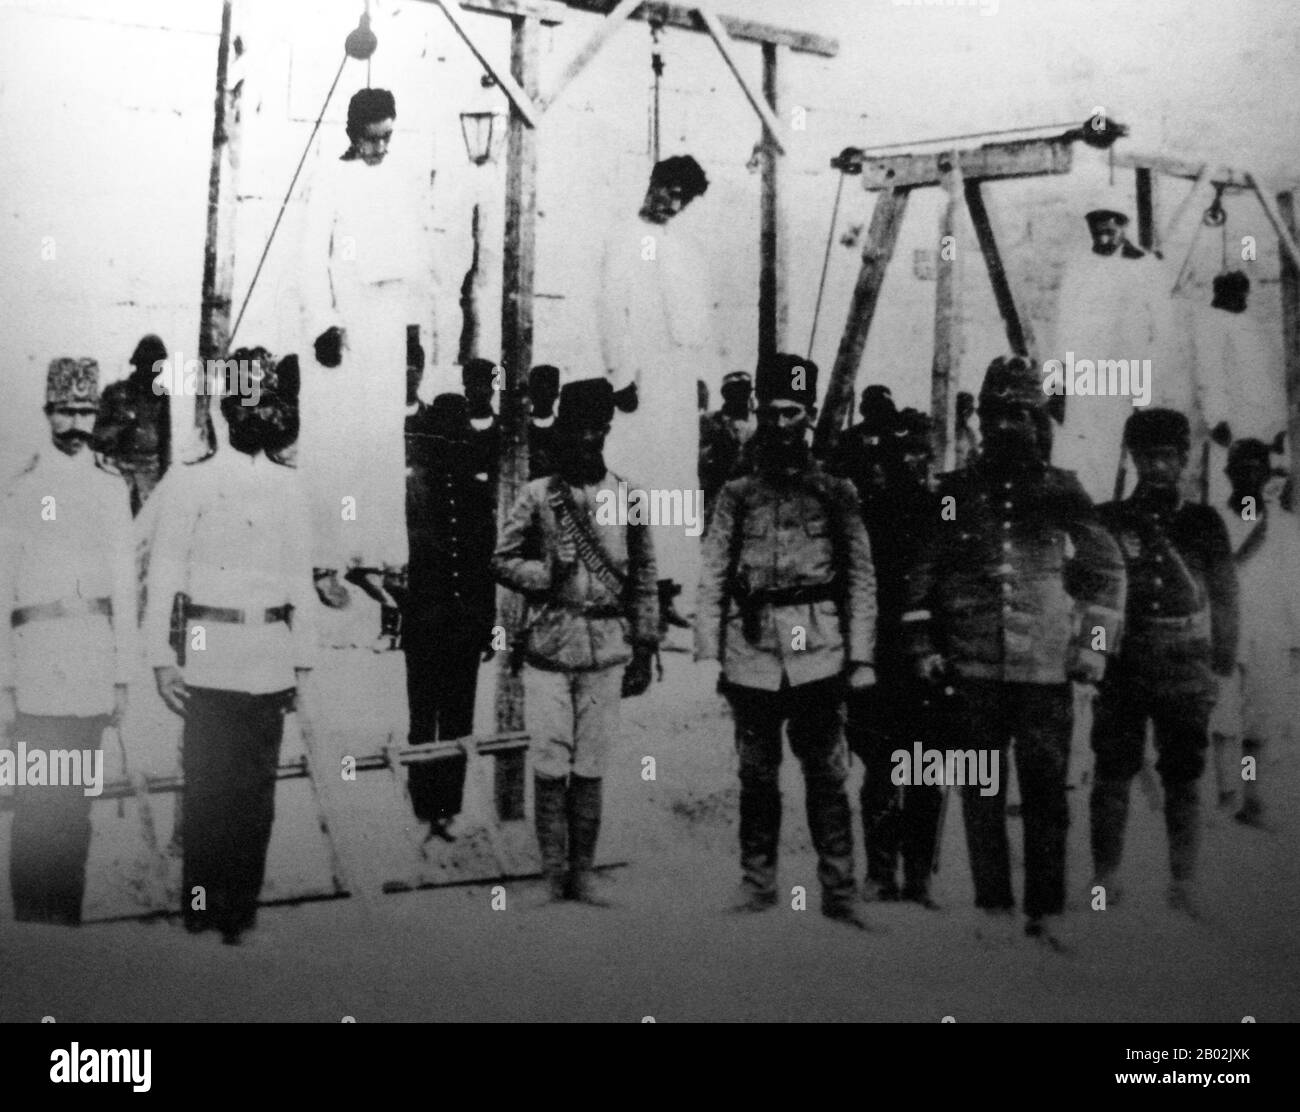 Syria / Turkey / Armenia: Armenian doctors hanged in public at Haleb / Aleppo, 1916. The Armenian Genocide refers to the deliberate and systematic destruction of the Armenian population of the Ottoman Empire during and just after World War I. It was implemented through wholesale massacres and deportations, with the deportations consisting of forced marches under conditions designed to lead to the death of the deportees. The total number of resulting Armenian deaths is generally held to have been between one and one and a half million. Stock Photo